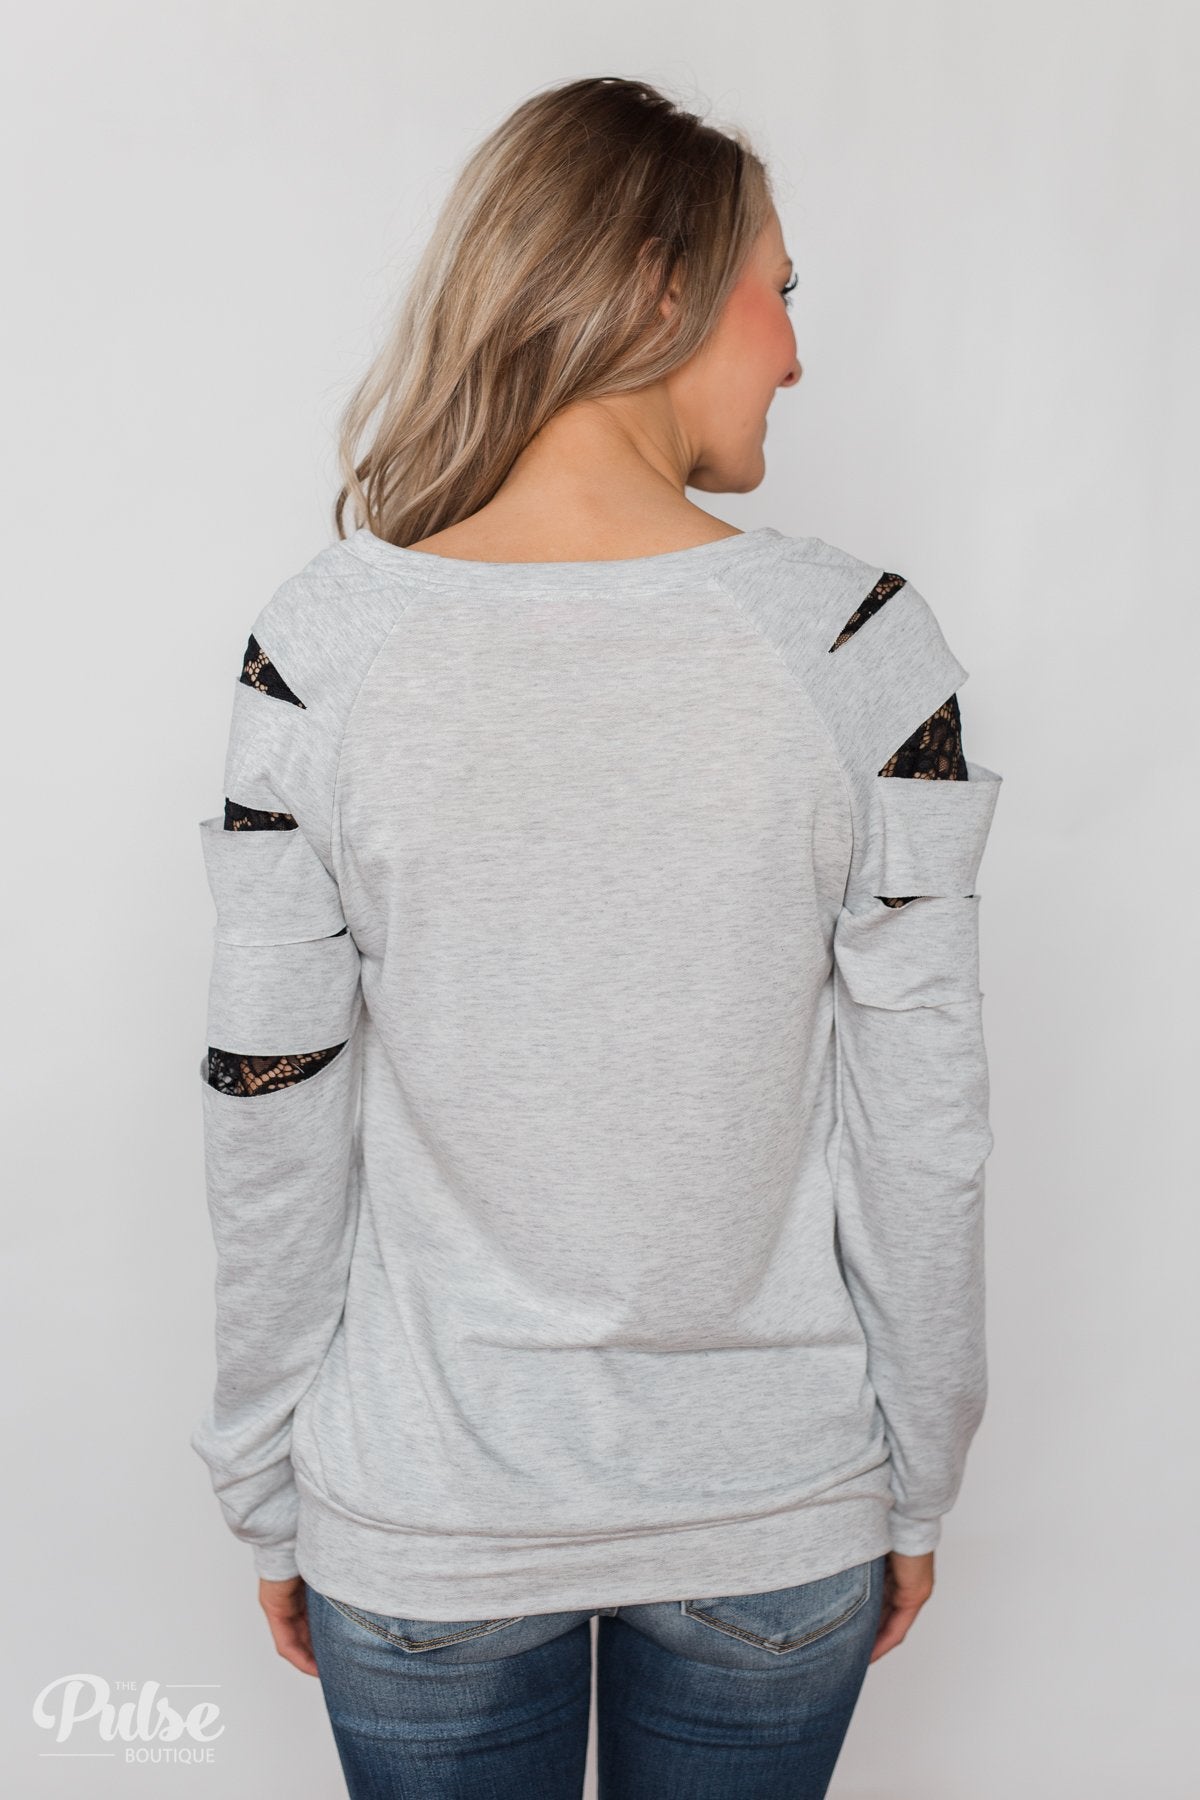 At First Glance Pullover Lace Detail Top- Grey